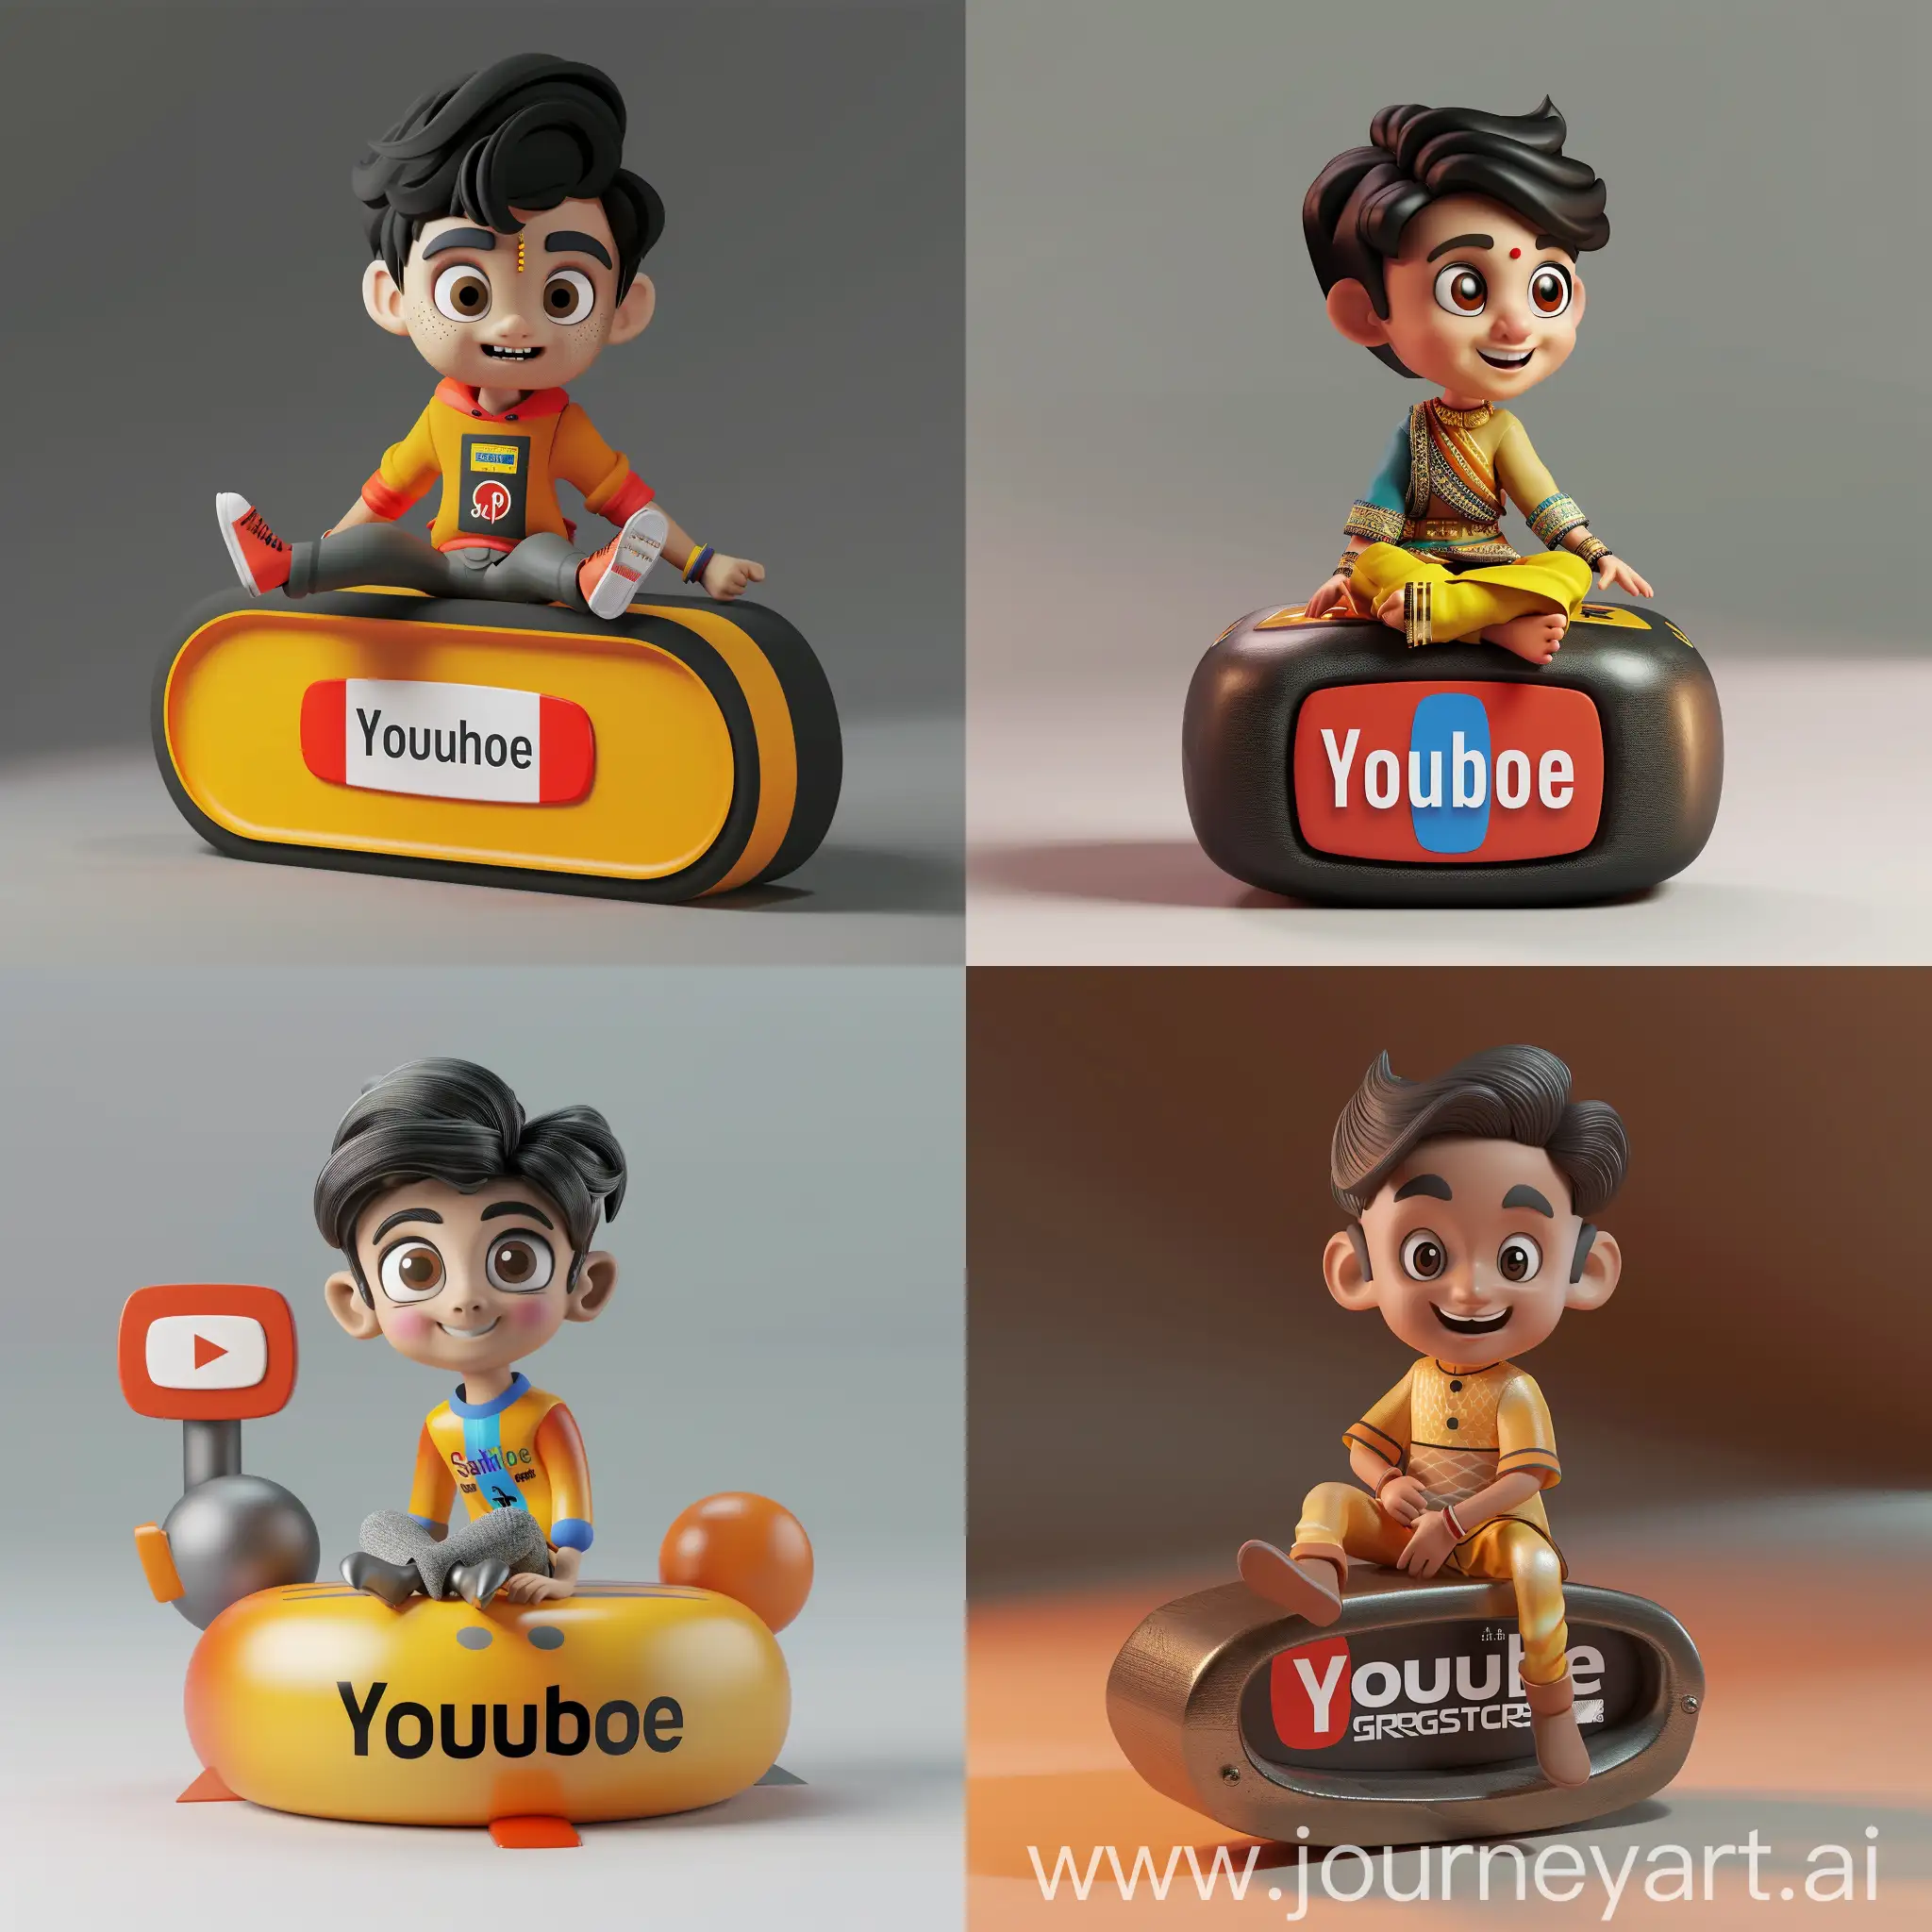 Prompt: "Create a 3D illustration of an animated character of a handsom boy sitting casually on top of a social media logo "YouTube". The character must wear modern Indian clothes. The background of the character is mockup of his YouTube profile page with a profile name "Smart Graphics" and a profile picture same as character."